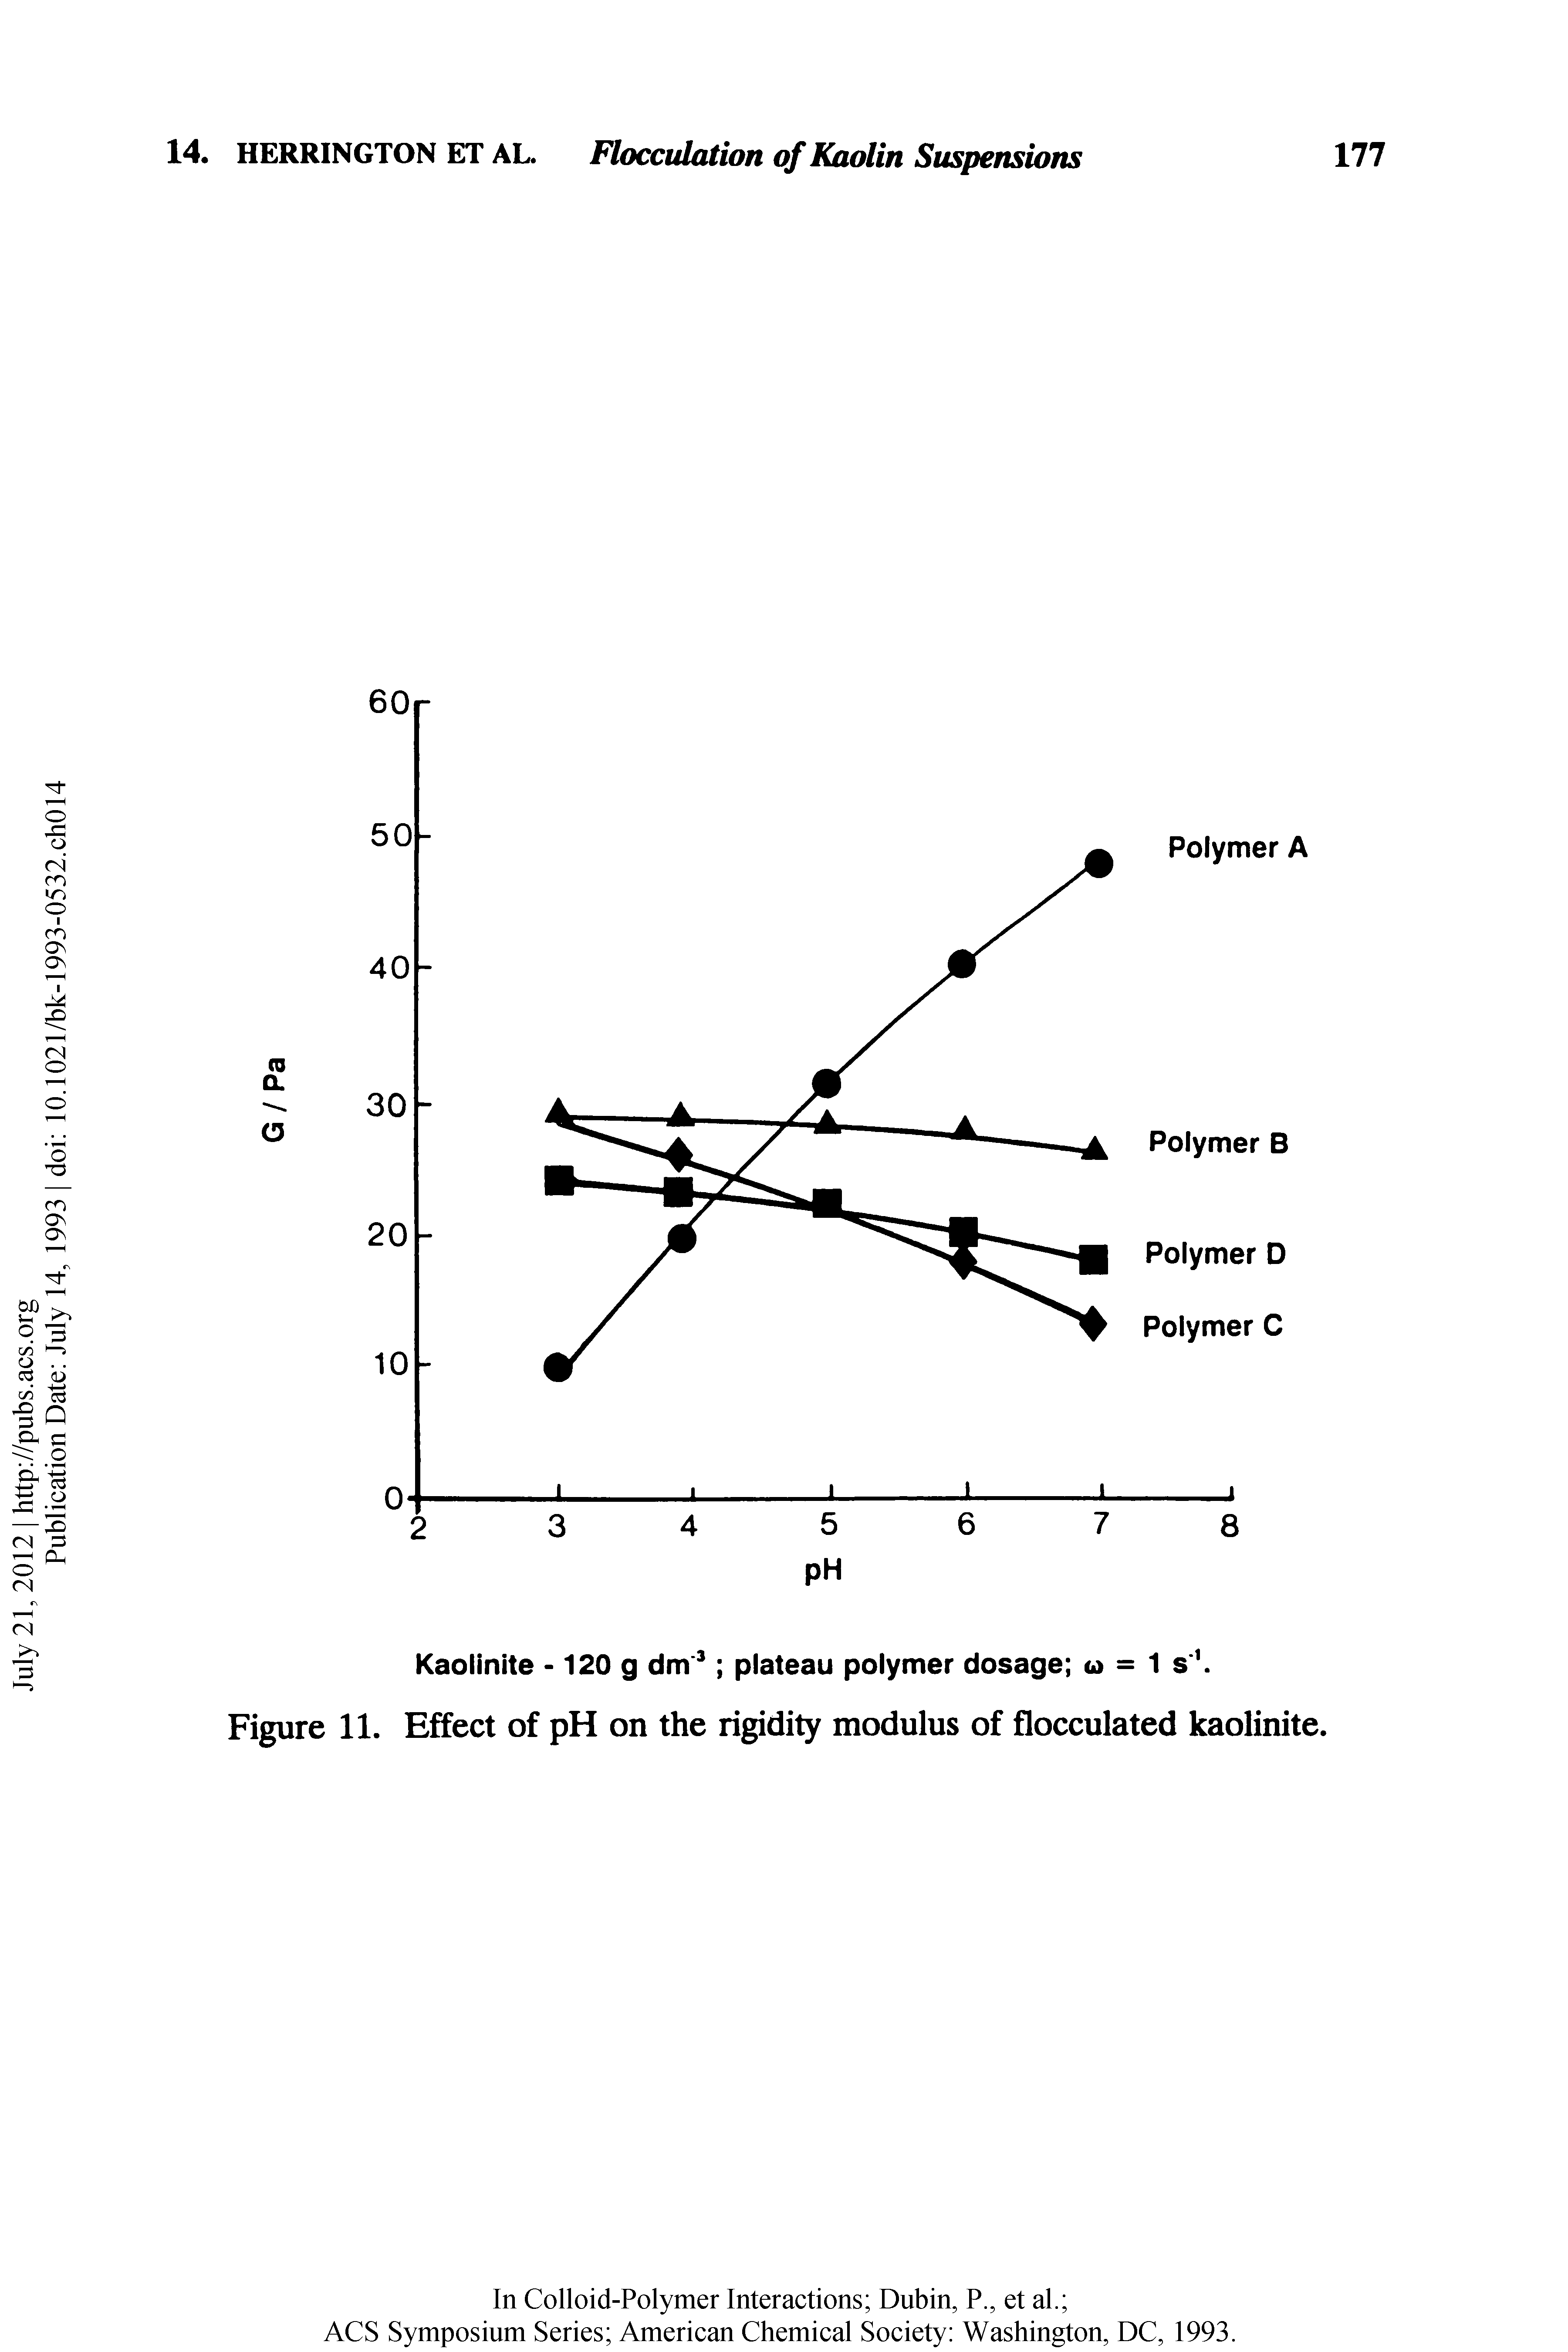 Figure 11. Effect of pH on the rigidity modulus of flocculated kaolinite.